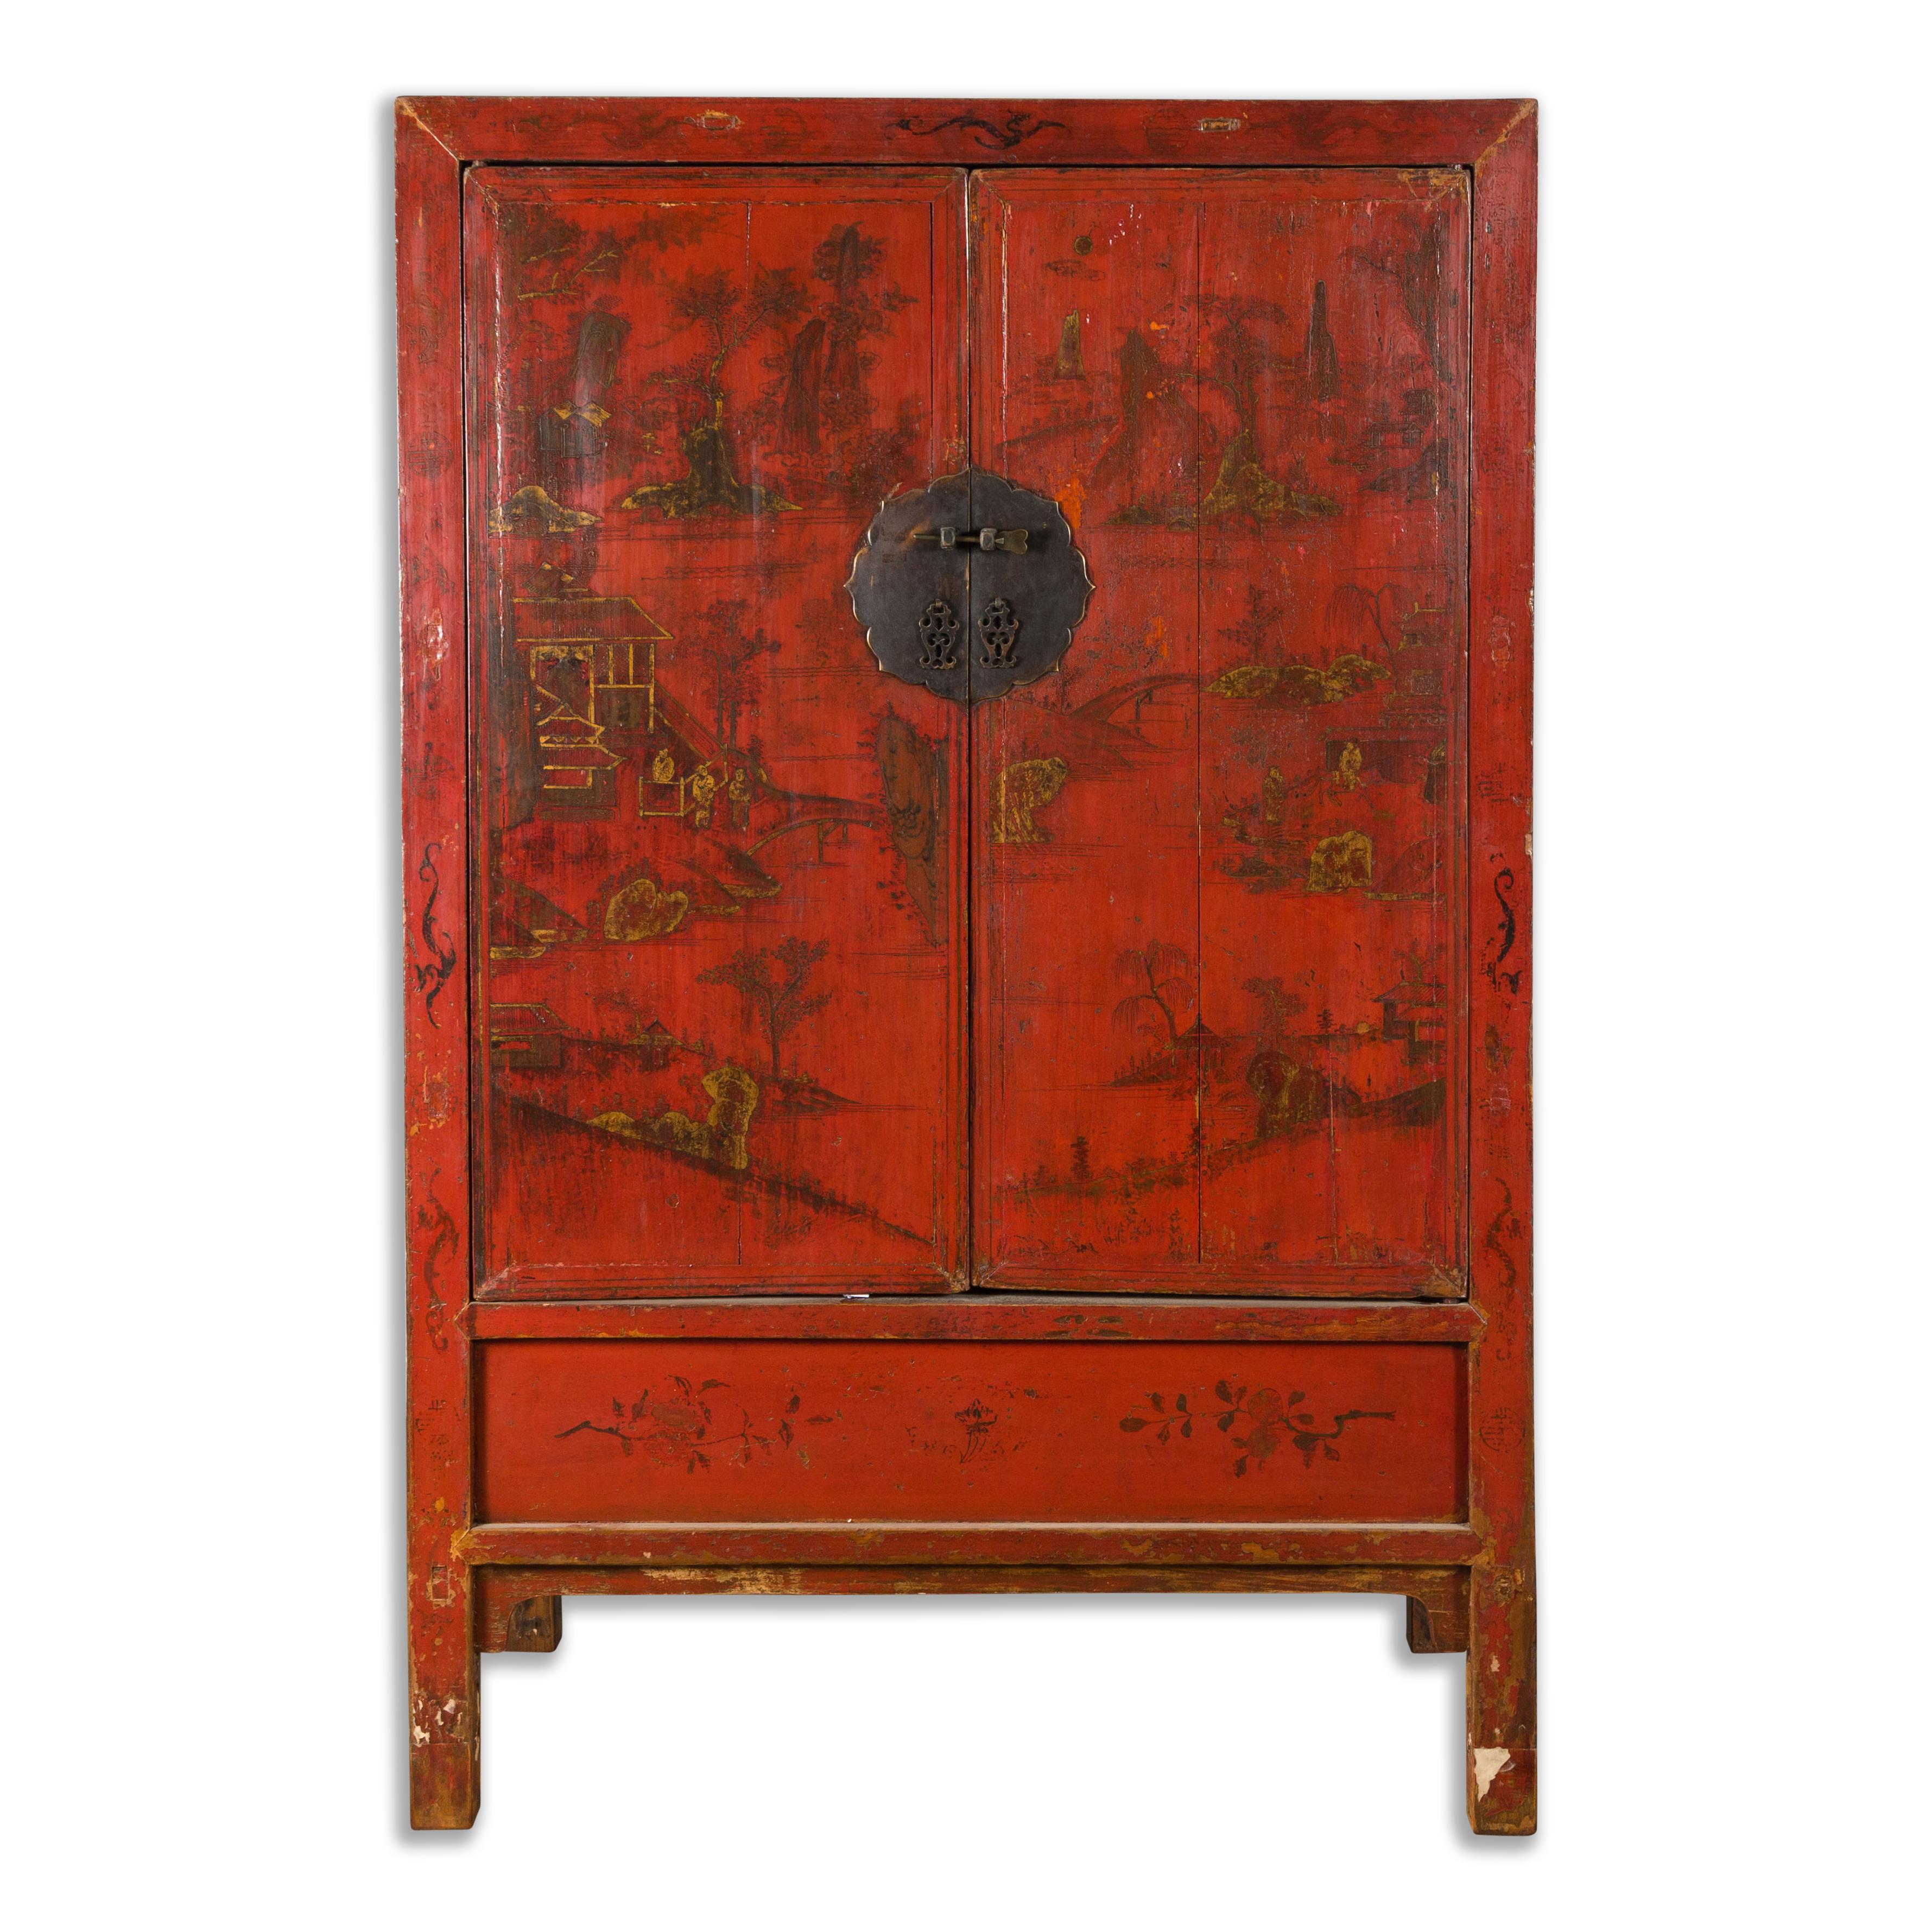 Qing Dynasty 19th Century Hand-Painted Cabinet with Original Red Lacquer For Sale 8